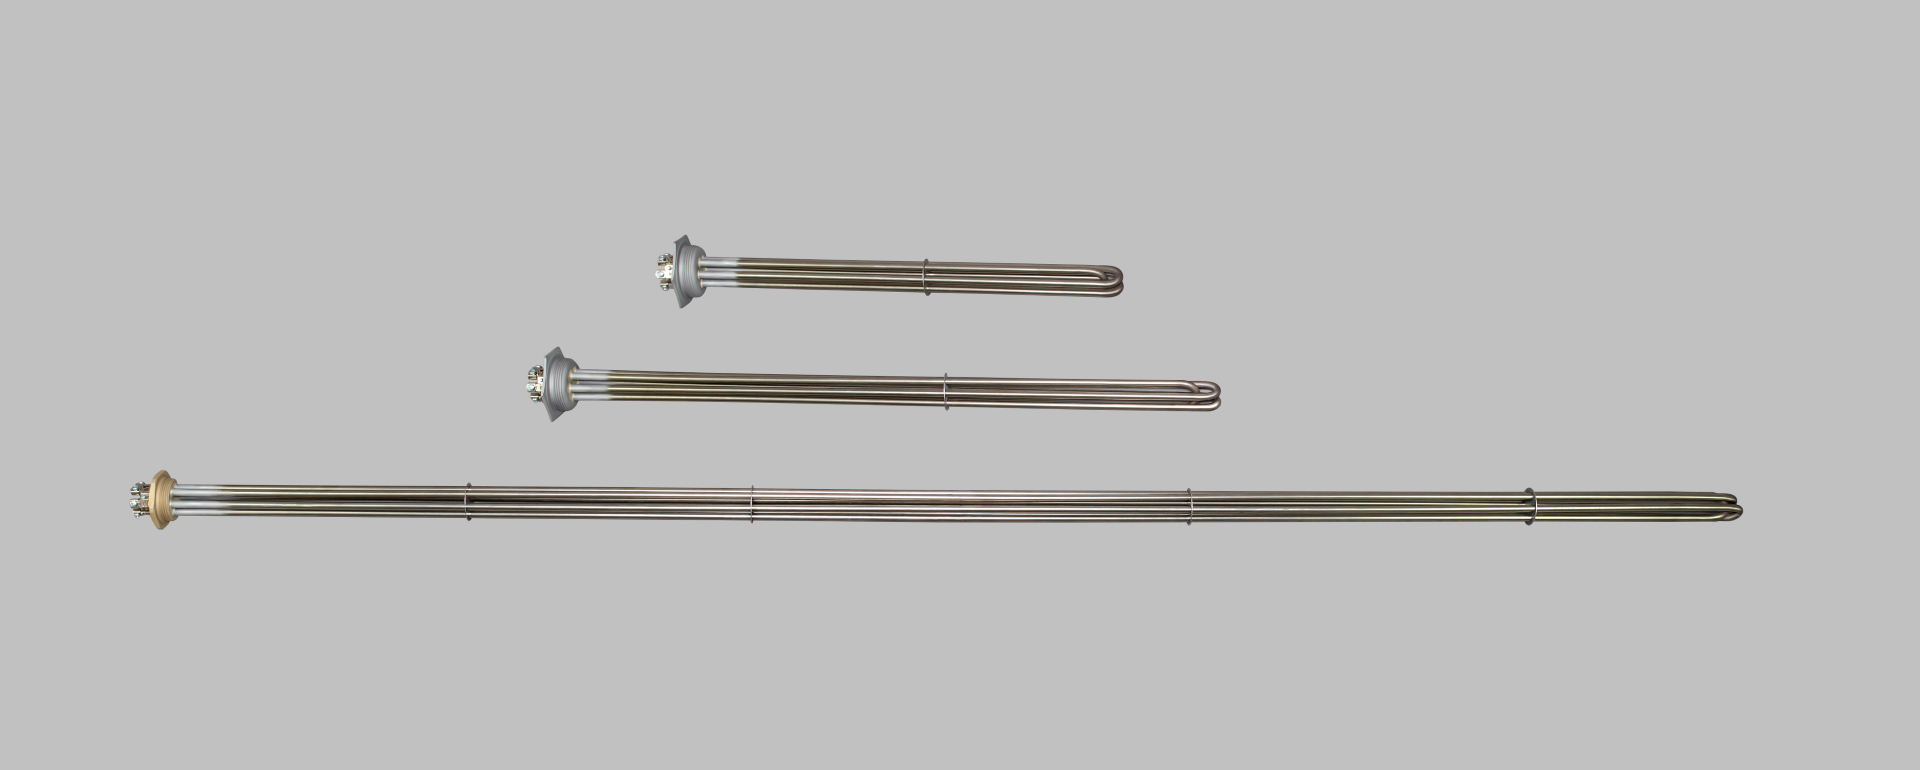 Heating elements dedicated to operate in oil or water furnace-3